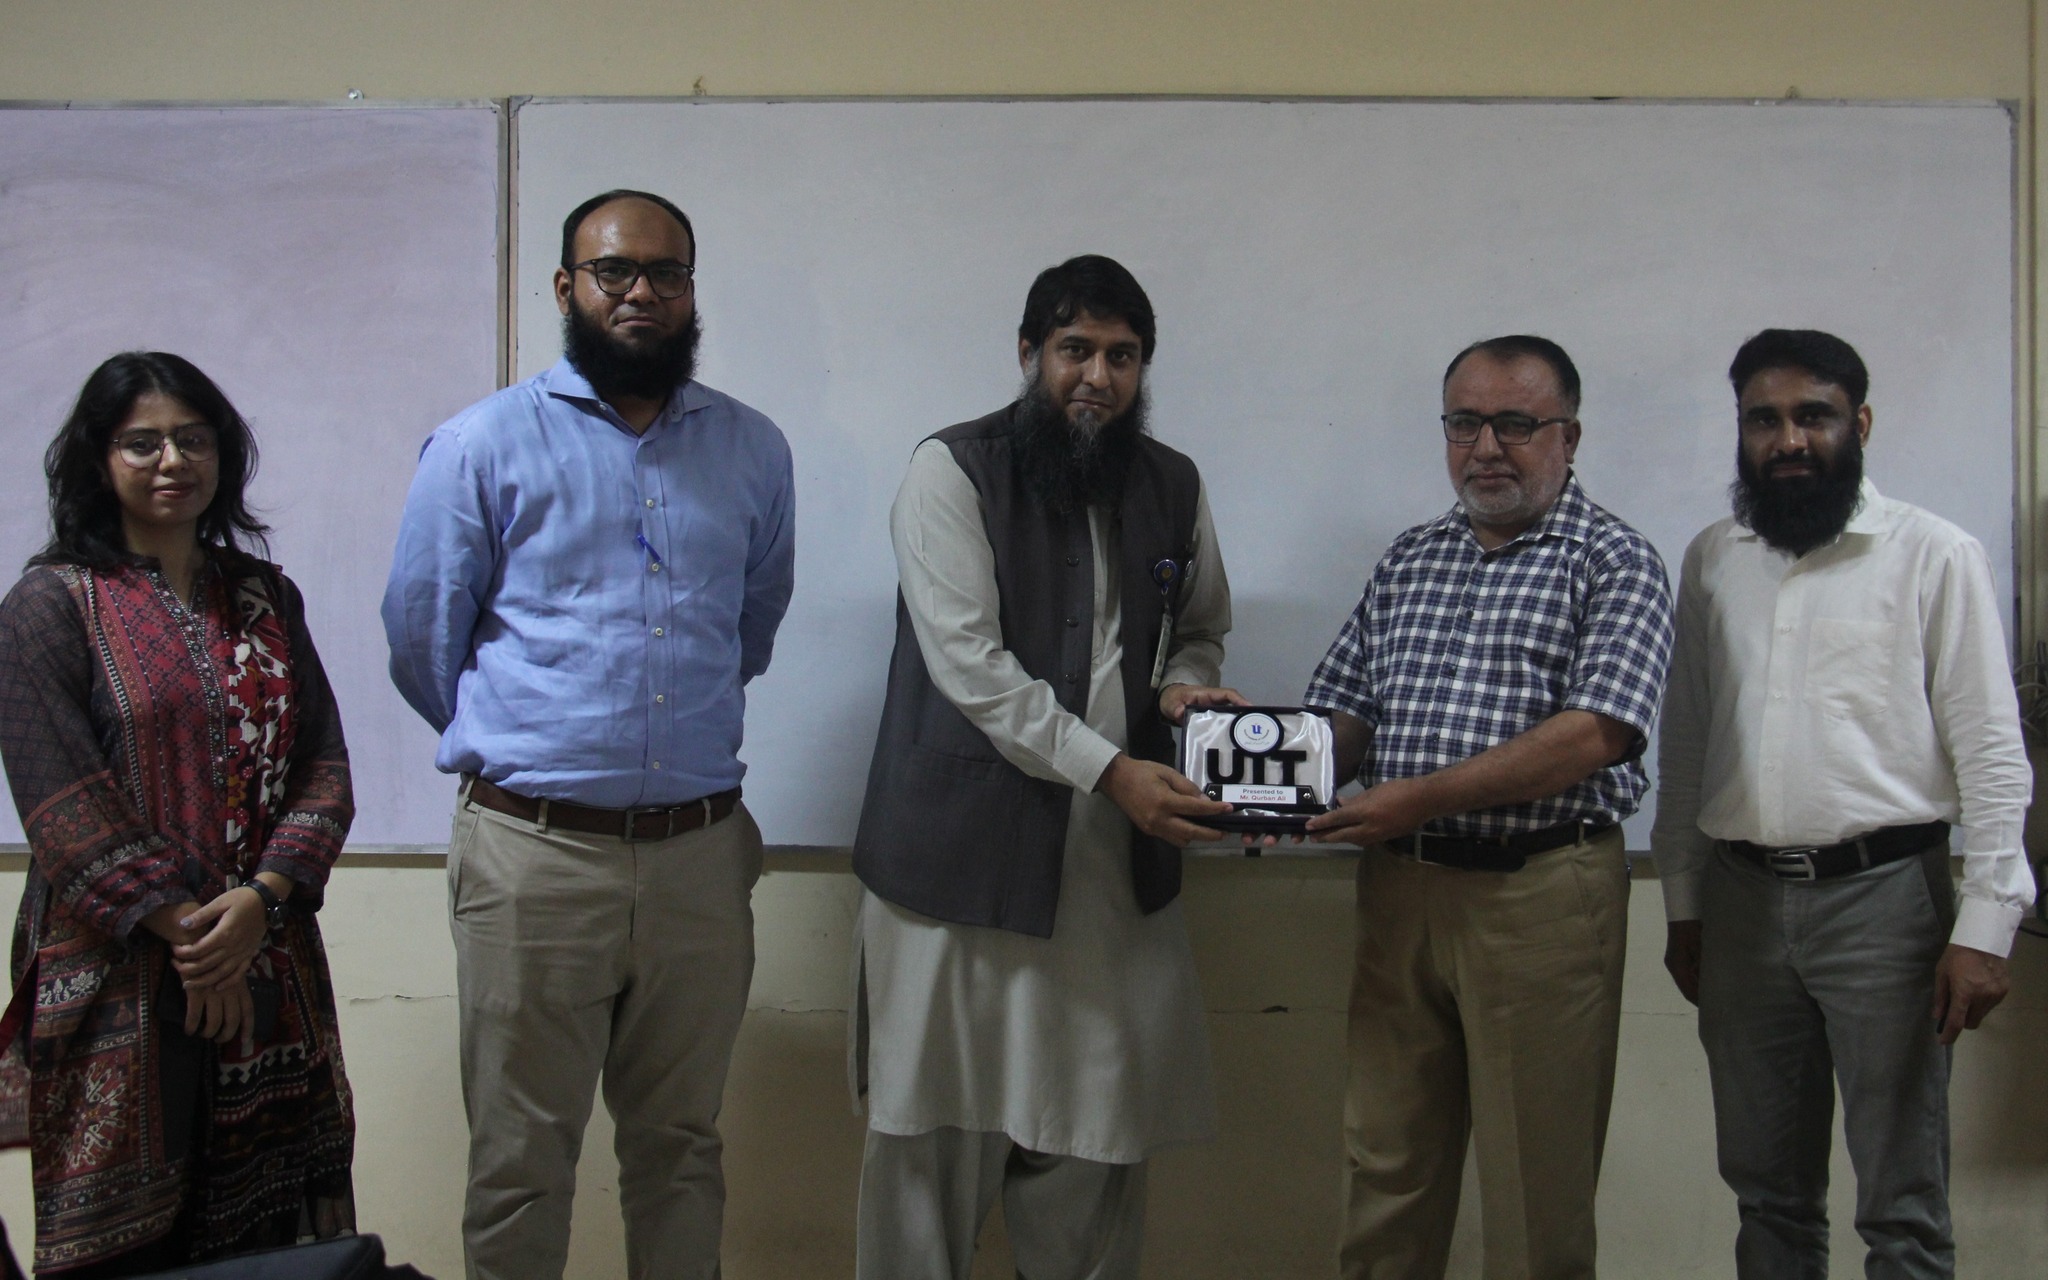 UIT University recently hosted a dynamic session on “Occupational Health, Safety, and Environmental Challenges” with Engr. Qurban Ali Zardari